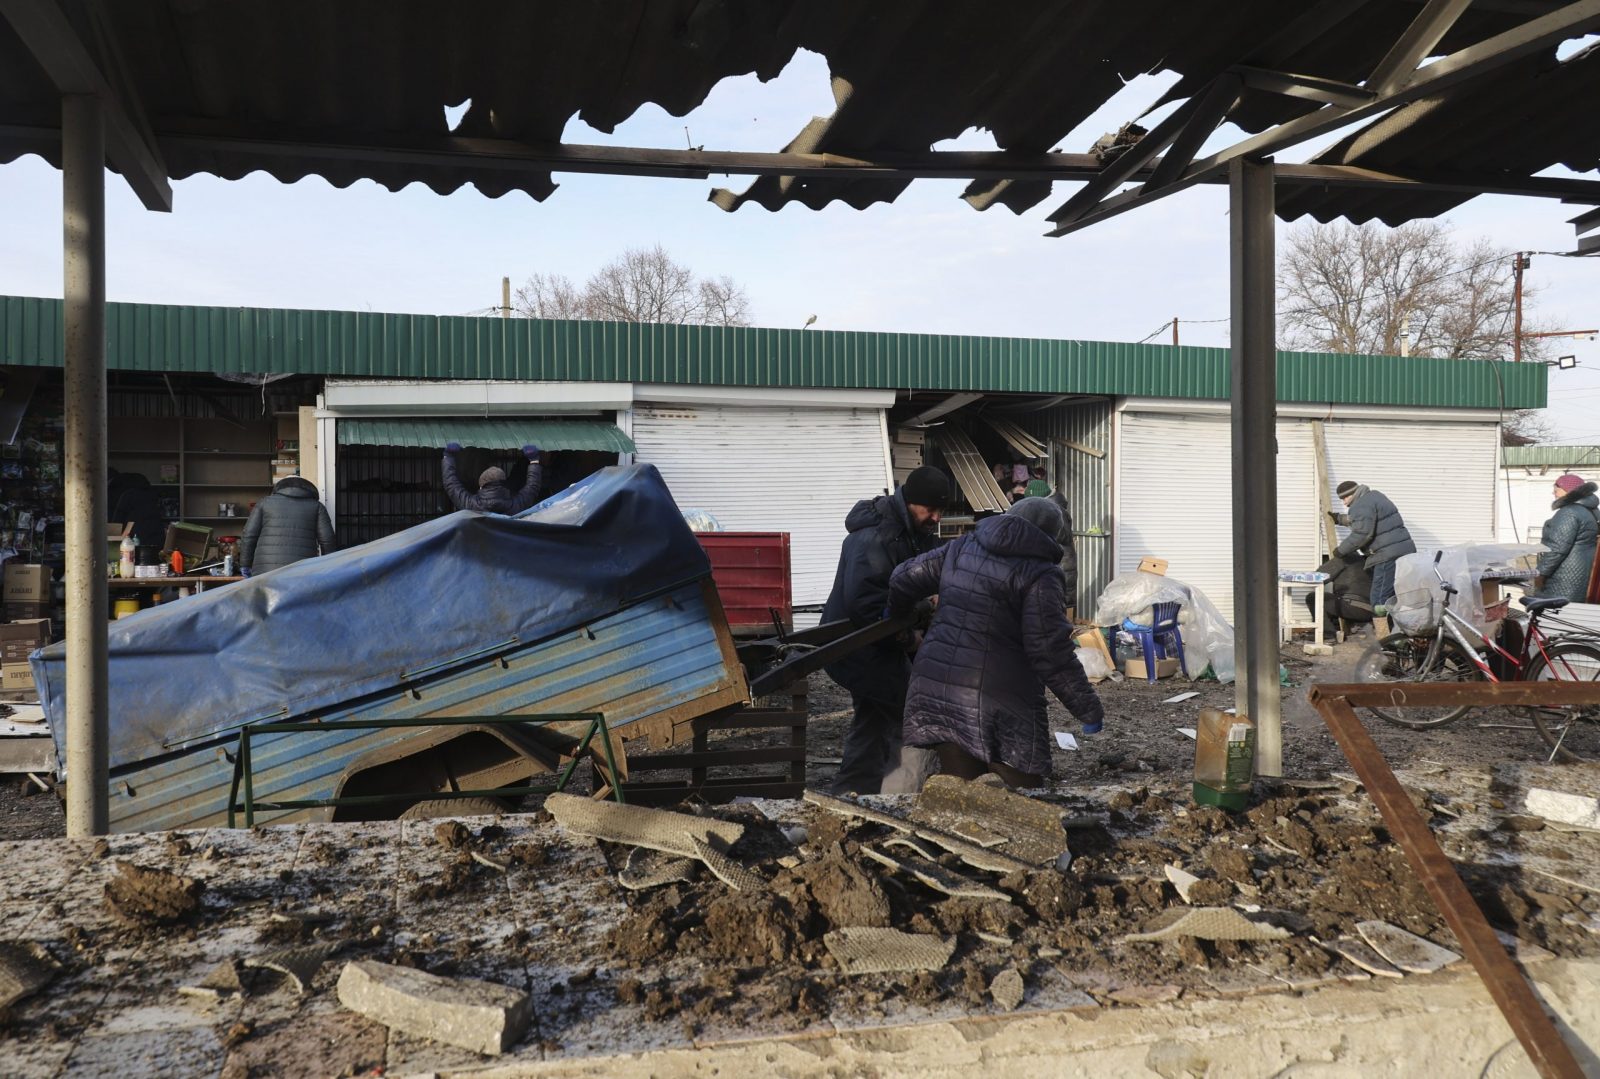 epa10397019 Ukrainians attempt to salvage goods at a damaged local market after shelling hit the town of Shevchenkove, Kharkiv region, northeastern Ukraine, 09 January 2023, amid Russia's invasion. Two people were killed and five others injured, among them a child, as a result of a rocket attack on Shevchenkive village in the Kupyansk district, the head of Kharkiv Regional State Administration Oleh Synehubov wrote on telegram. Russian troops on 24 February 2022, entered Ukrainian territory, starting a conflict that has provoked destruction and a humanitarian crisis.  EPA/SERGEY KOZLOV